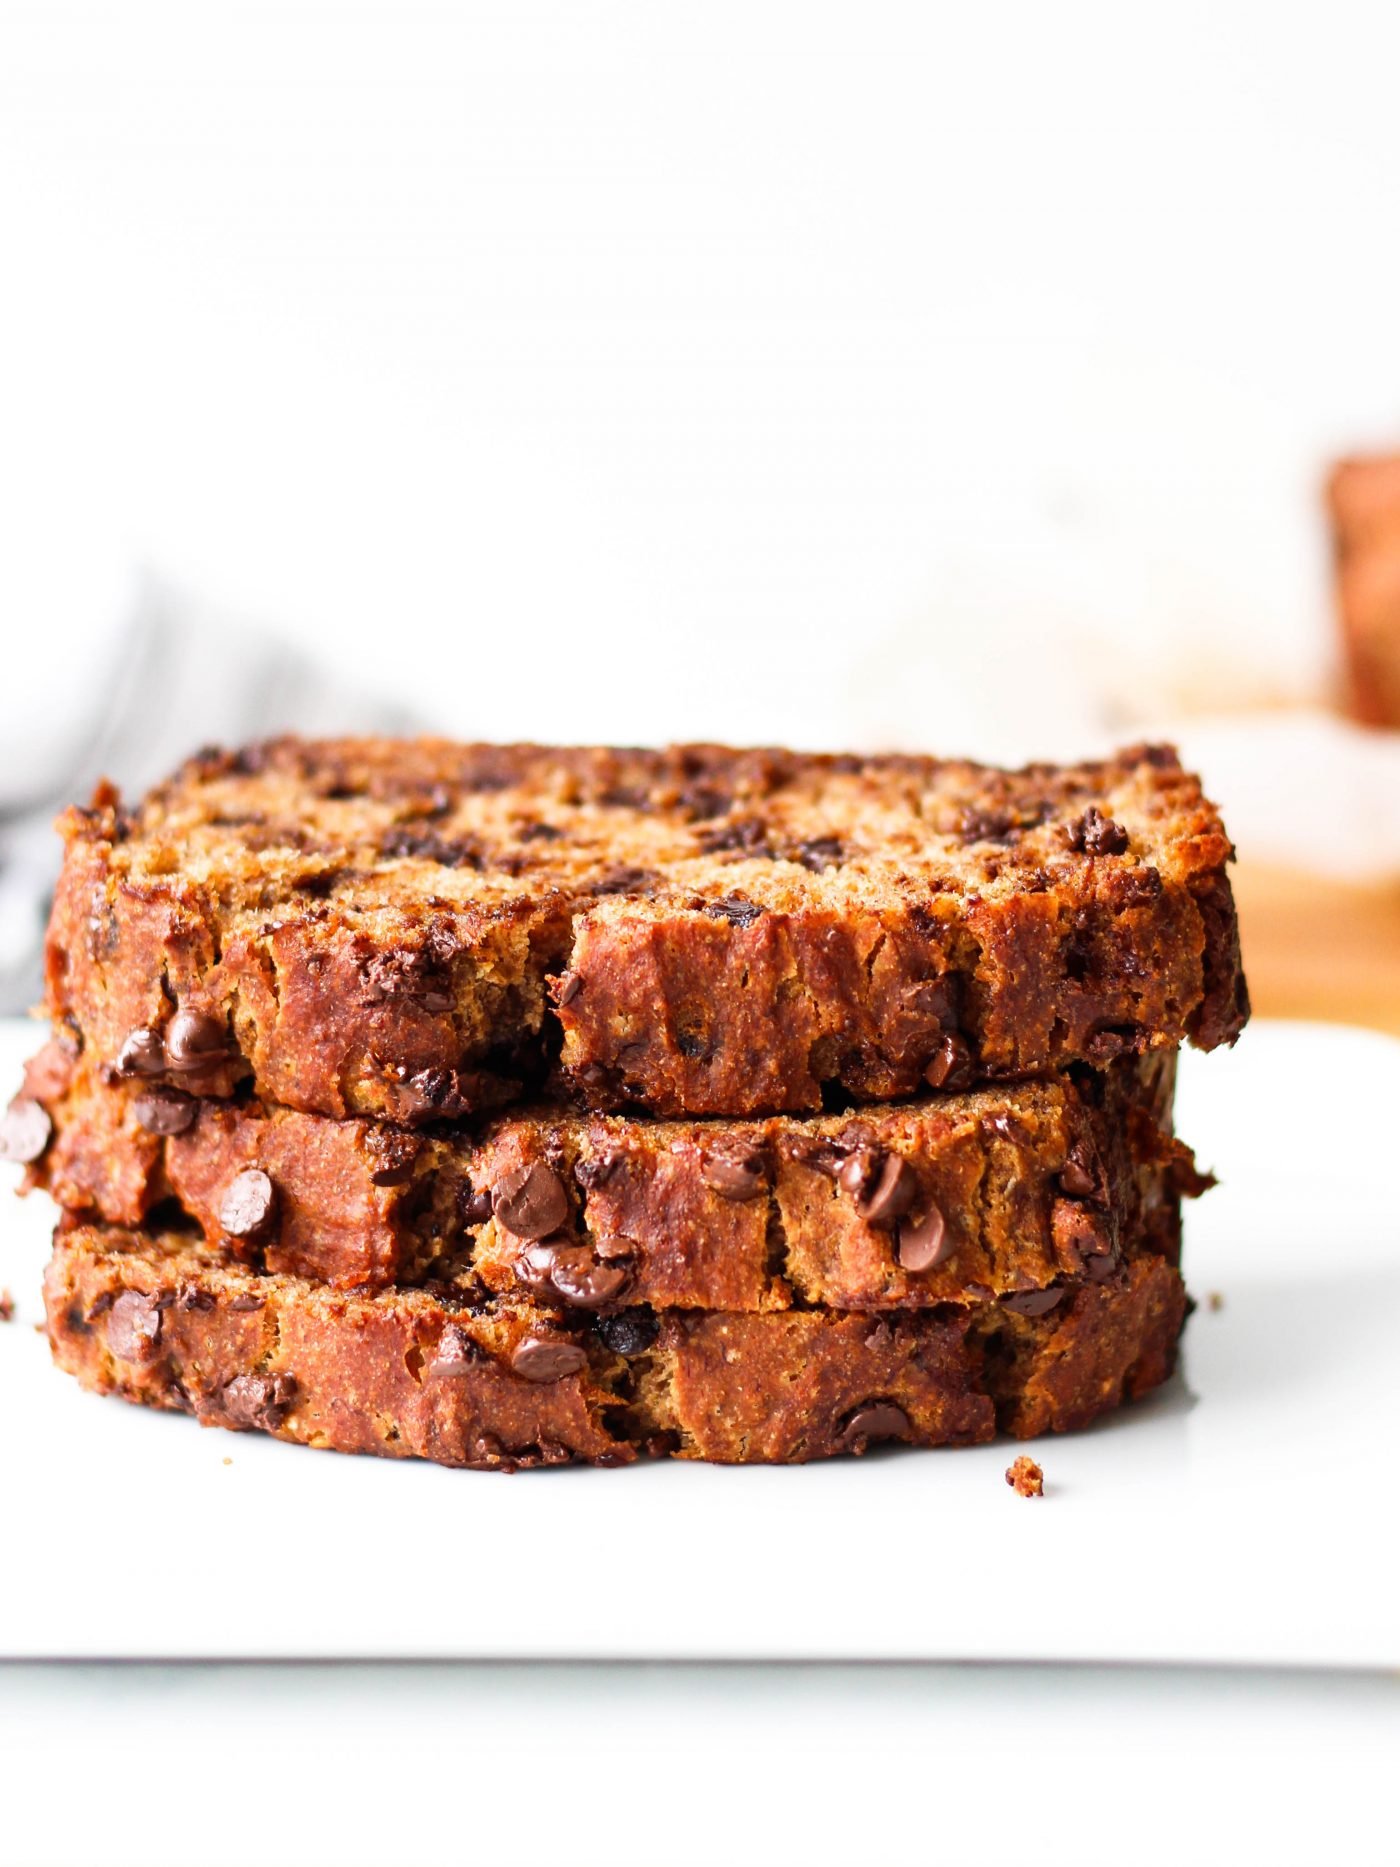 The easiest healthy banana bread recipe that you need to make. It's vegan and whole-grain!